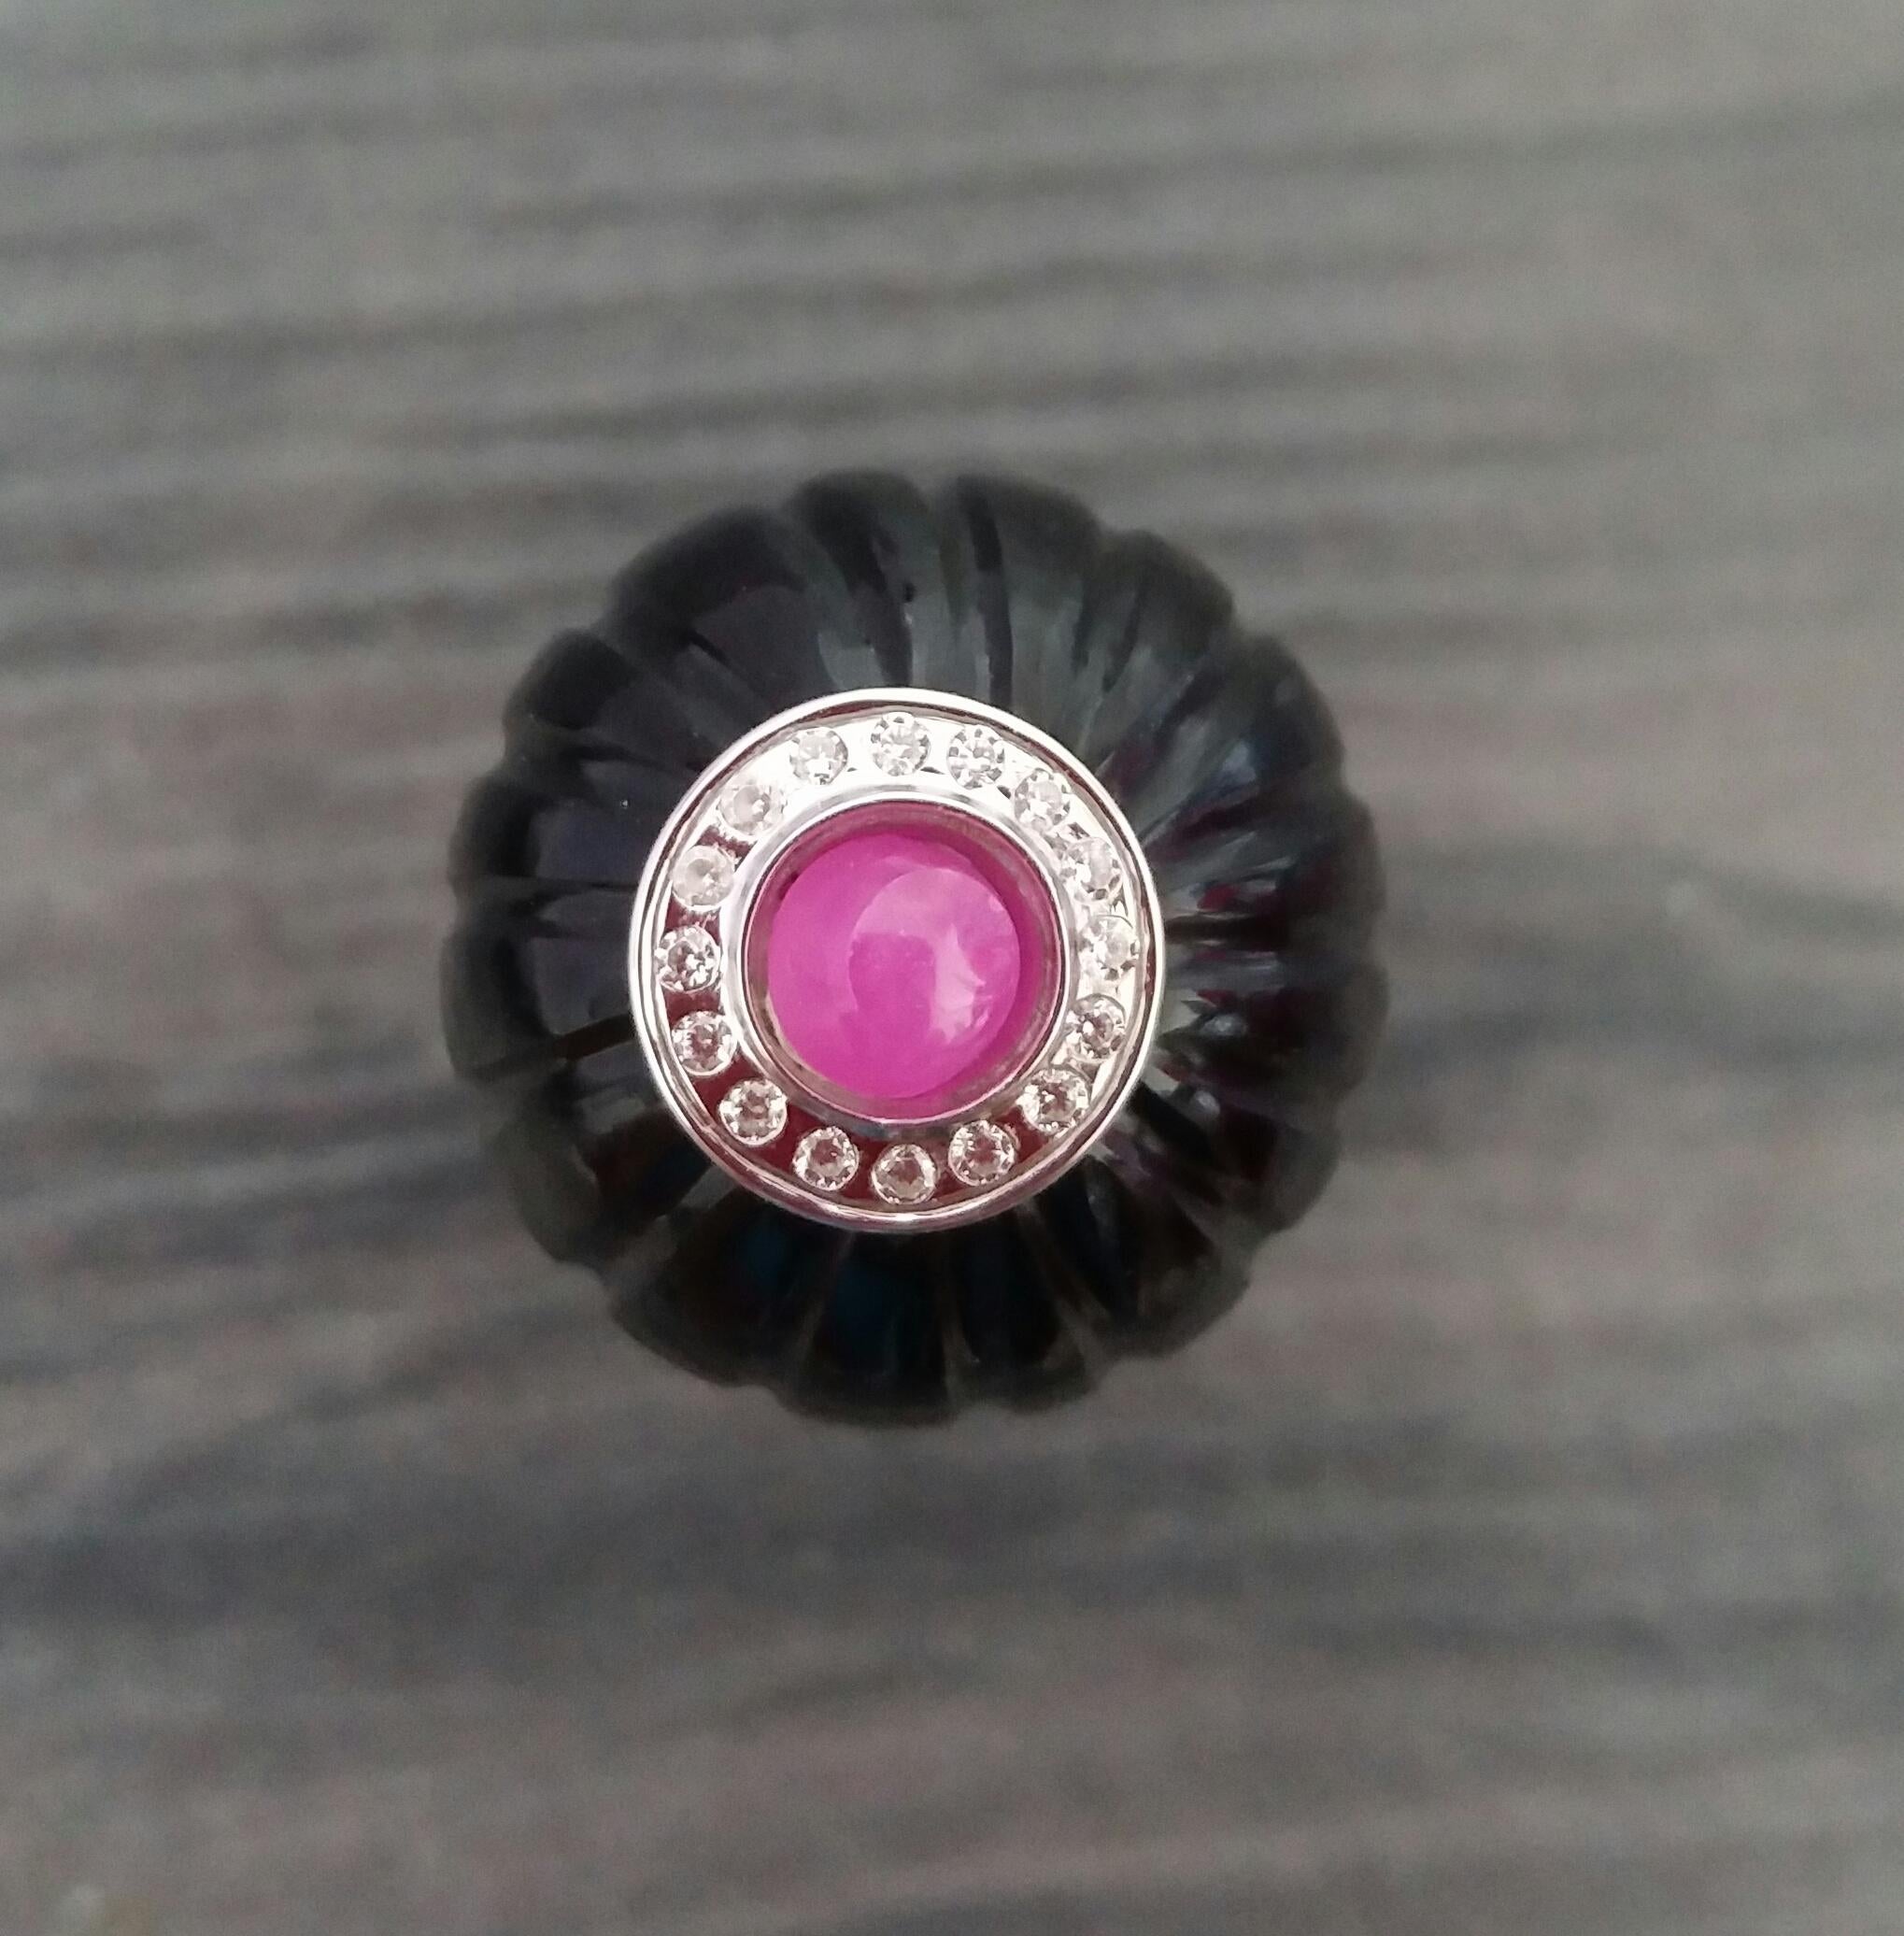 For Sale:  Art Deco Style Black Onyx Carved Ball Ruby 14k White Gold Diamonds Cocktail Ring 4